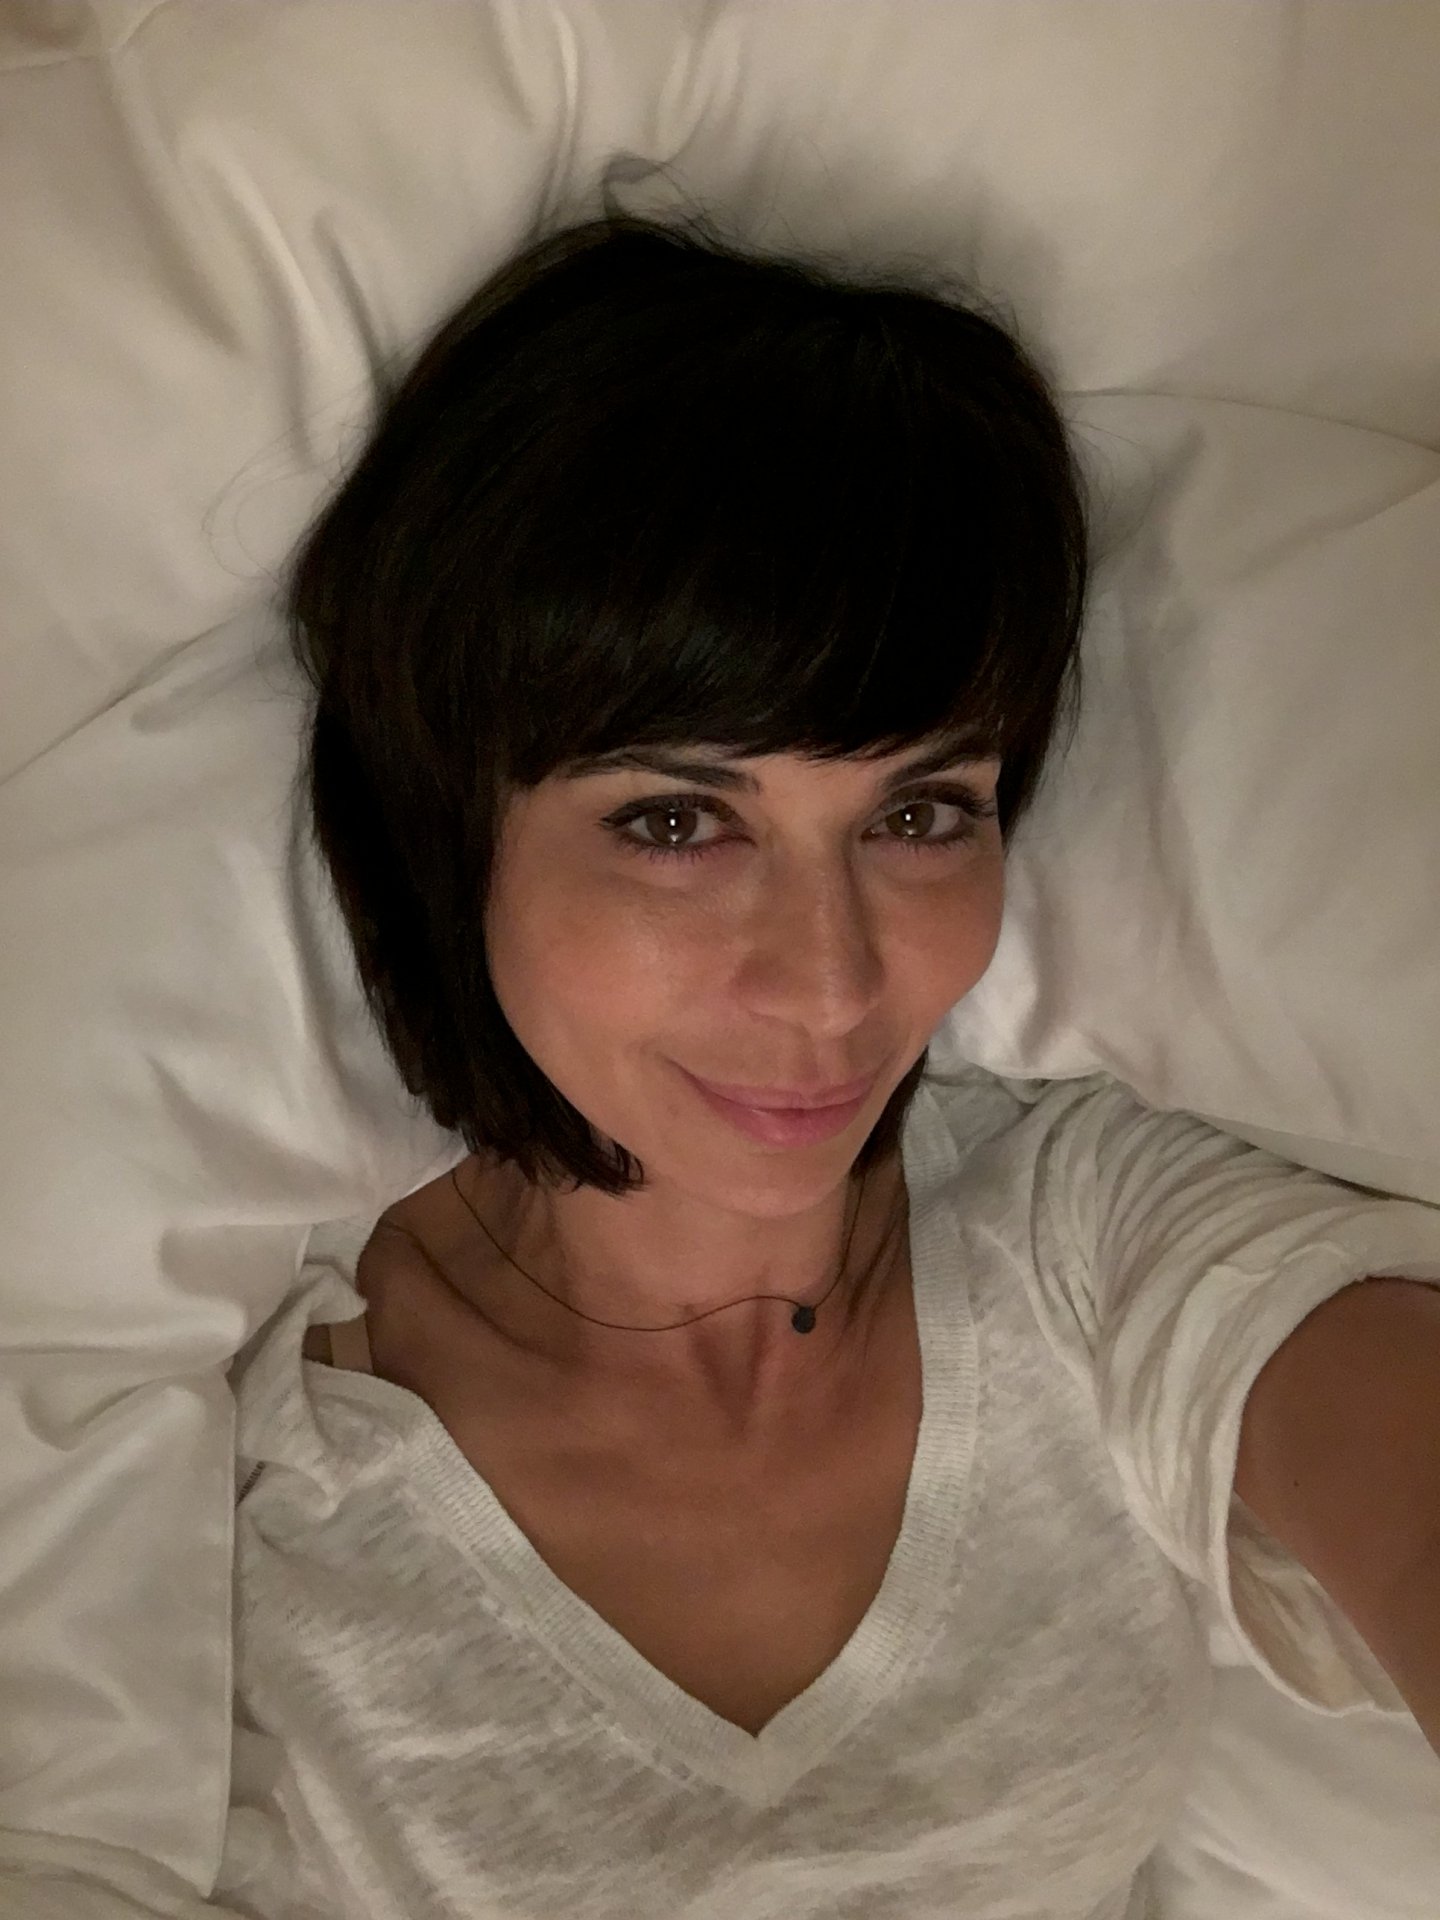 doral jackson recommends catherine bell leaked photos pic